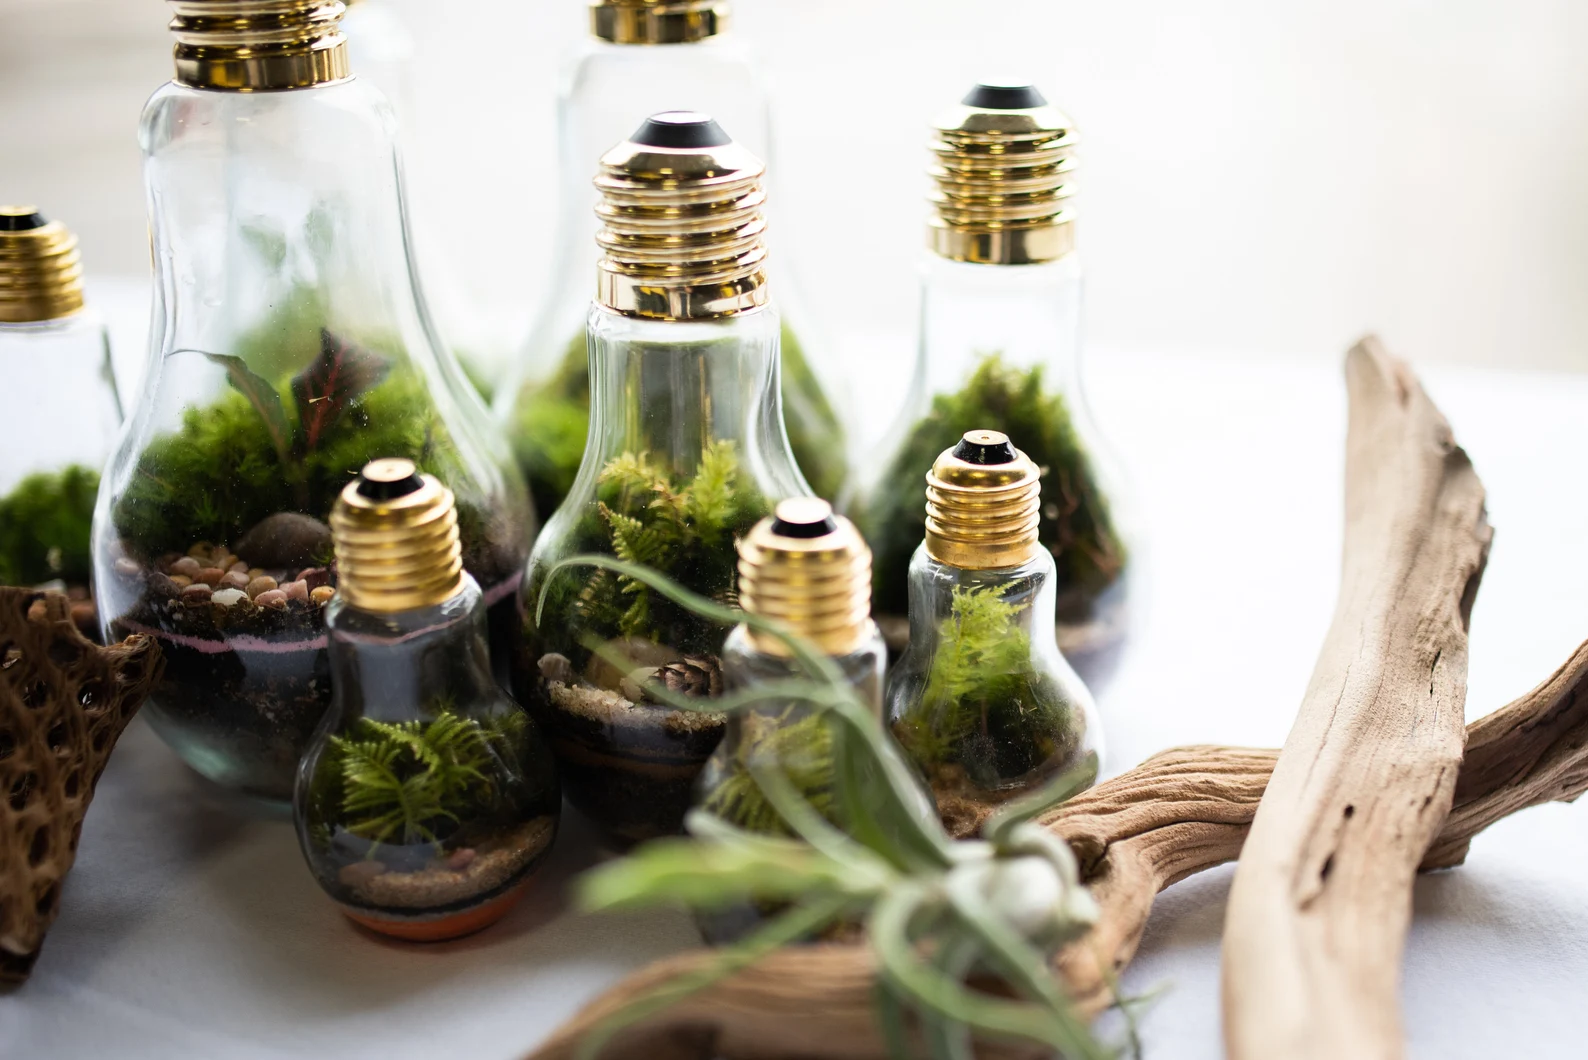 A-collection-of-light-bulbs-made-into-terrarium-jars-sits-with-driftwood.